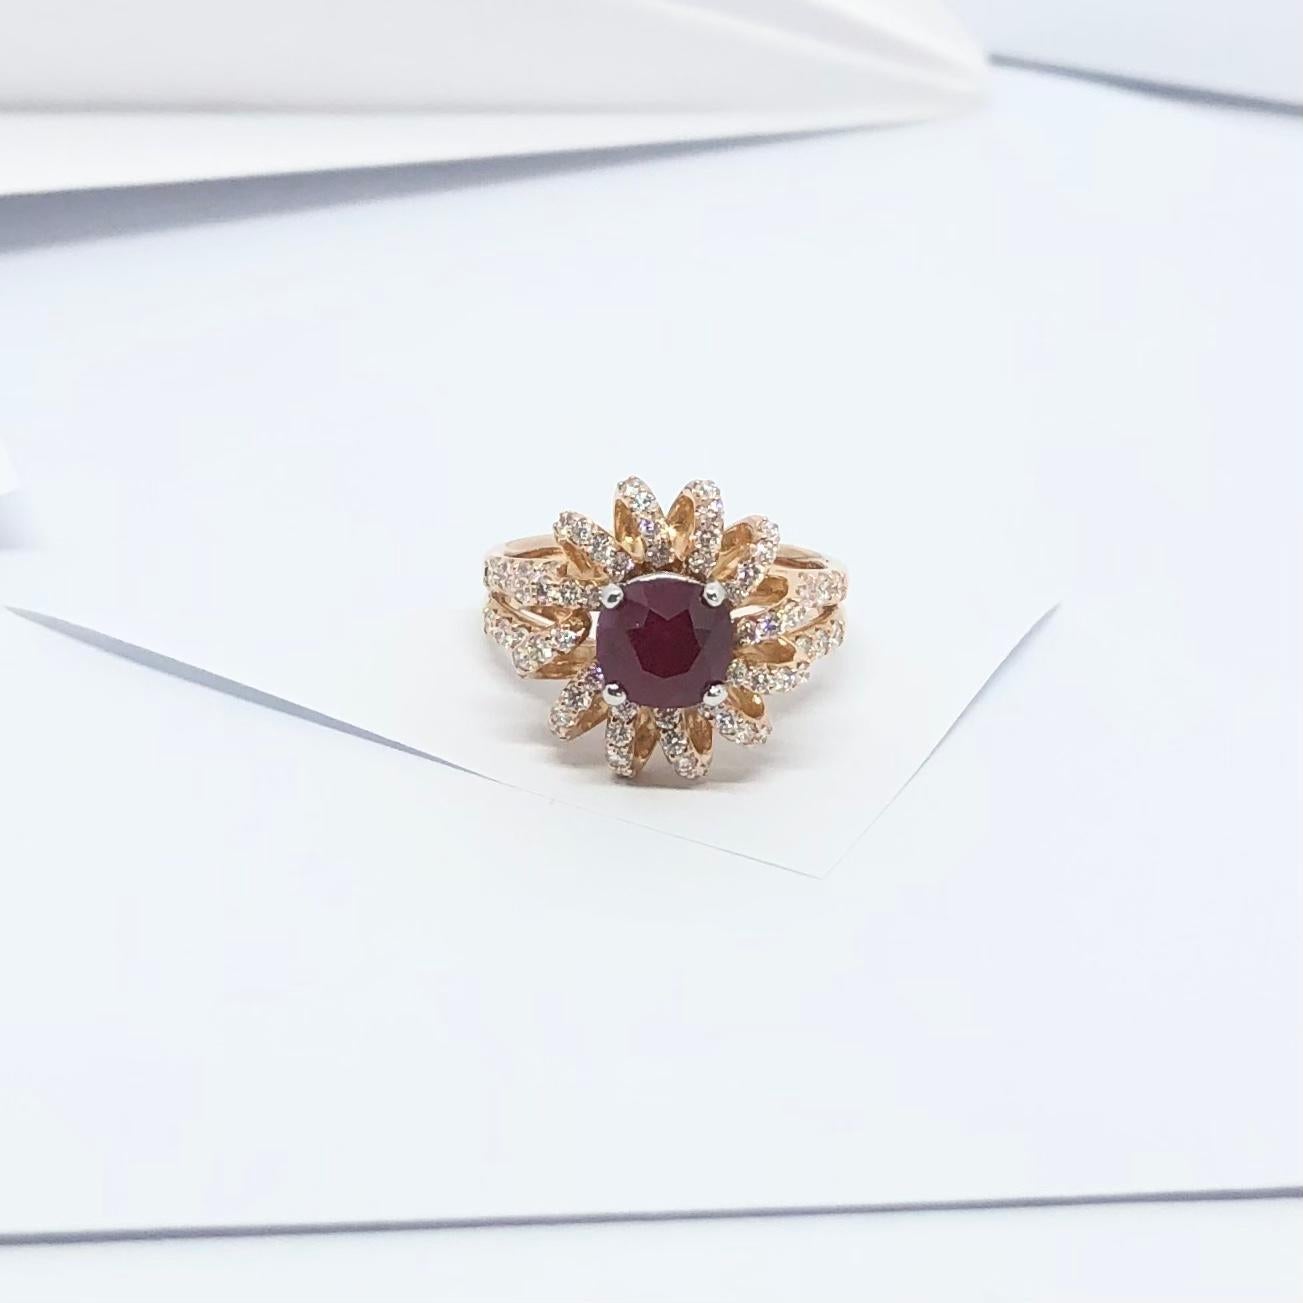 Certified Burmese Pigeon's Blood Ruby with Diamond Ring Set in 18K Rose Gold For Sale 9